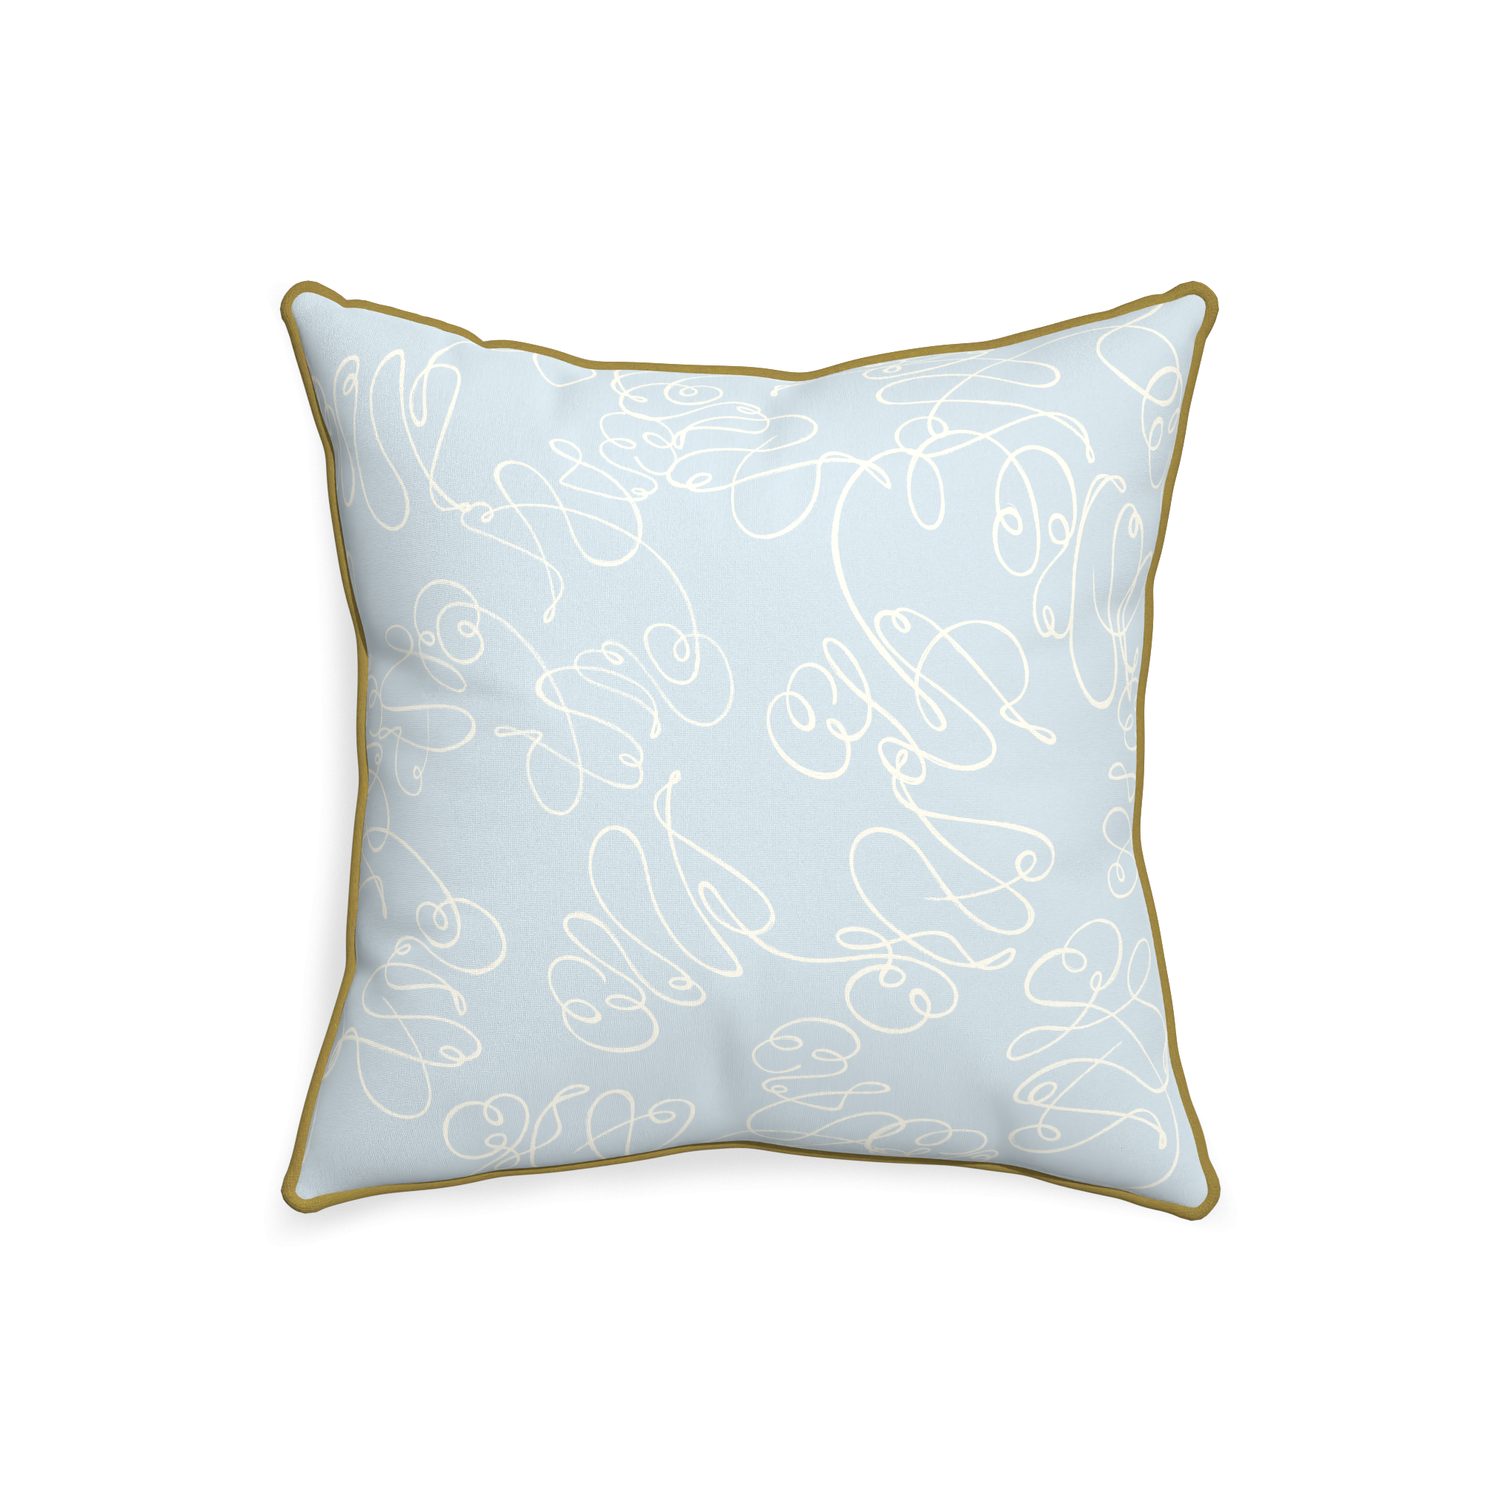 20-square mirabella custom powder blue abstractpillow with c piping on white background